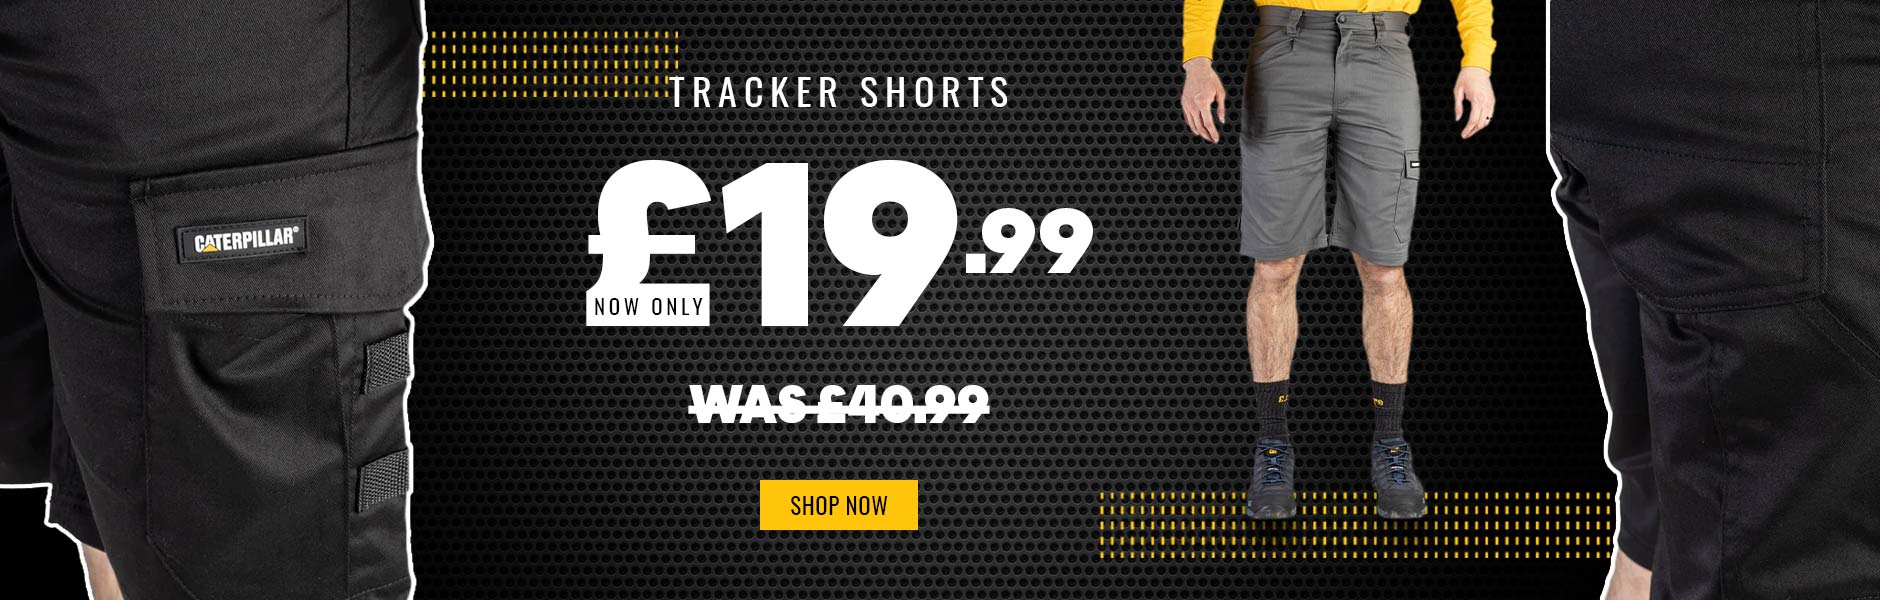 Images of a male model wearing Caterpillar Tracker Shorts on a black background. Text reads 'TRACKER SHORTS. NOW ONLY £19.99. WAS £40.99. SHOP NOW'